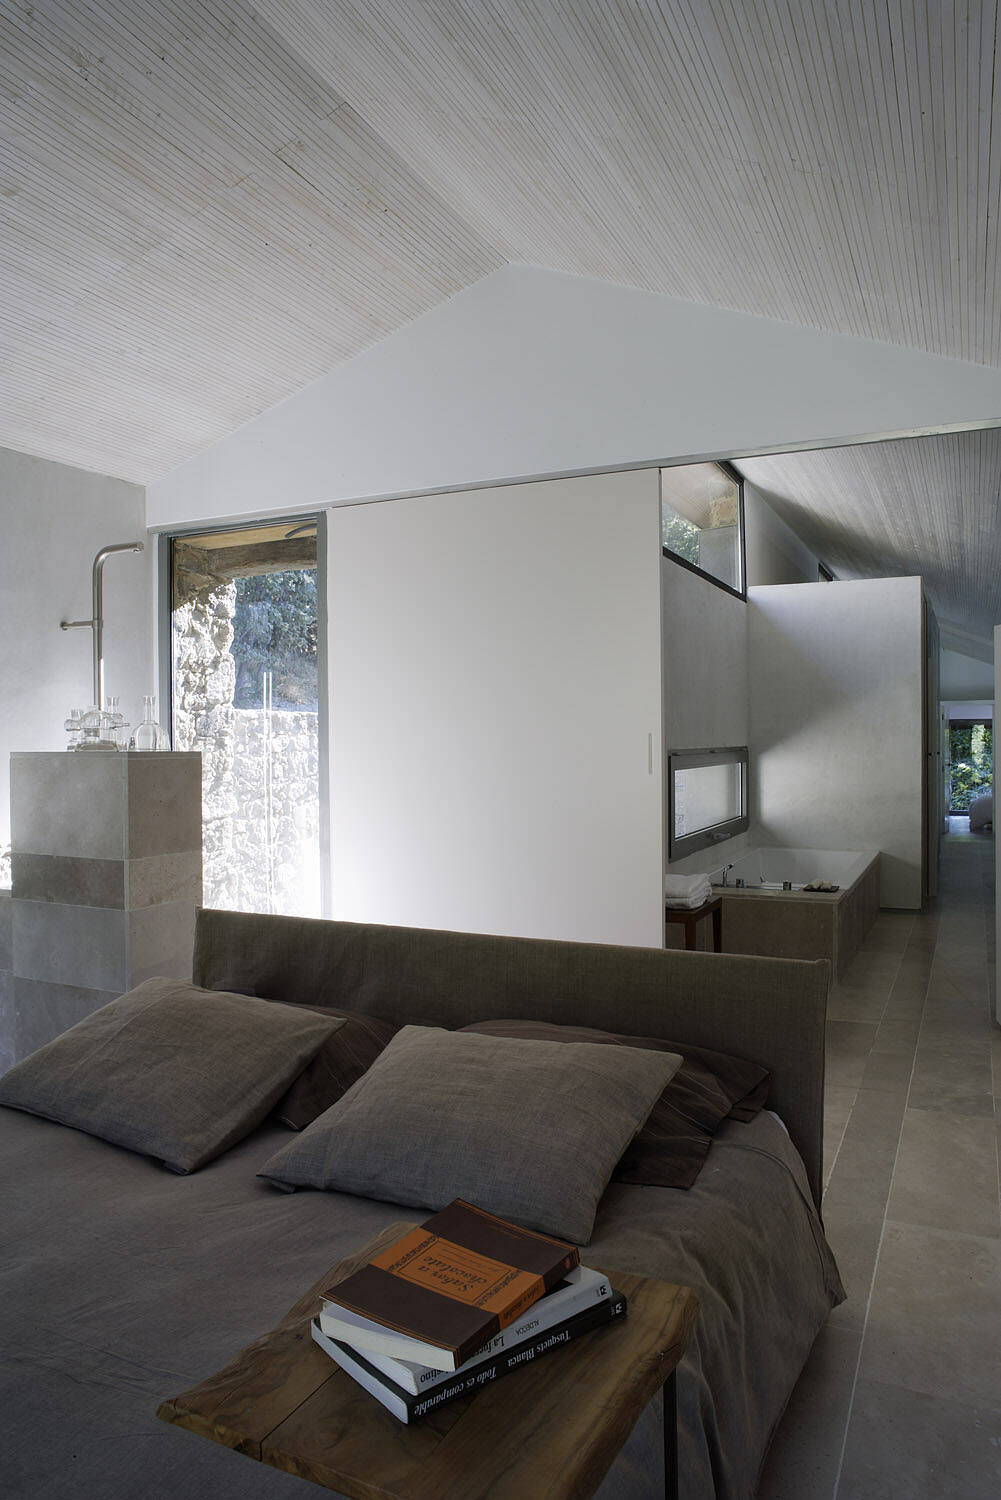 Country House in Spain by Ábaton Architects